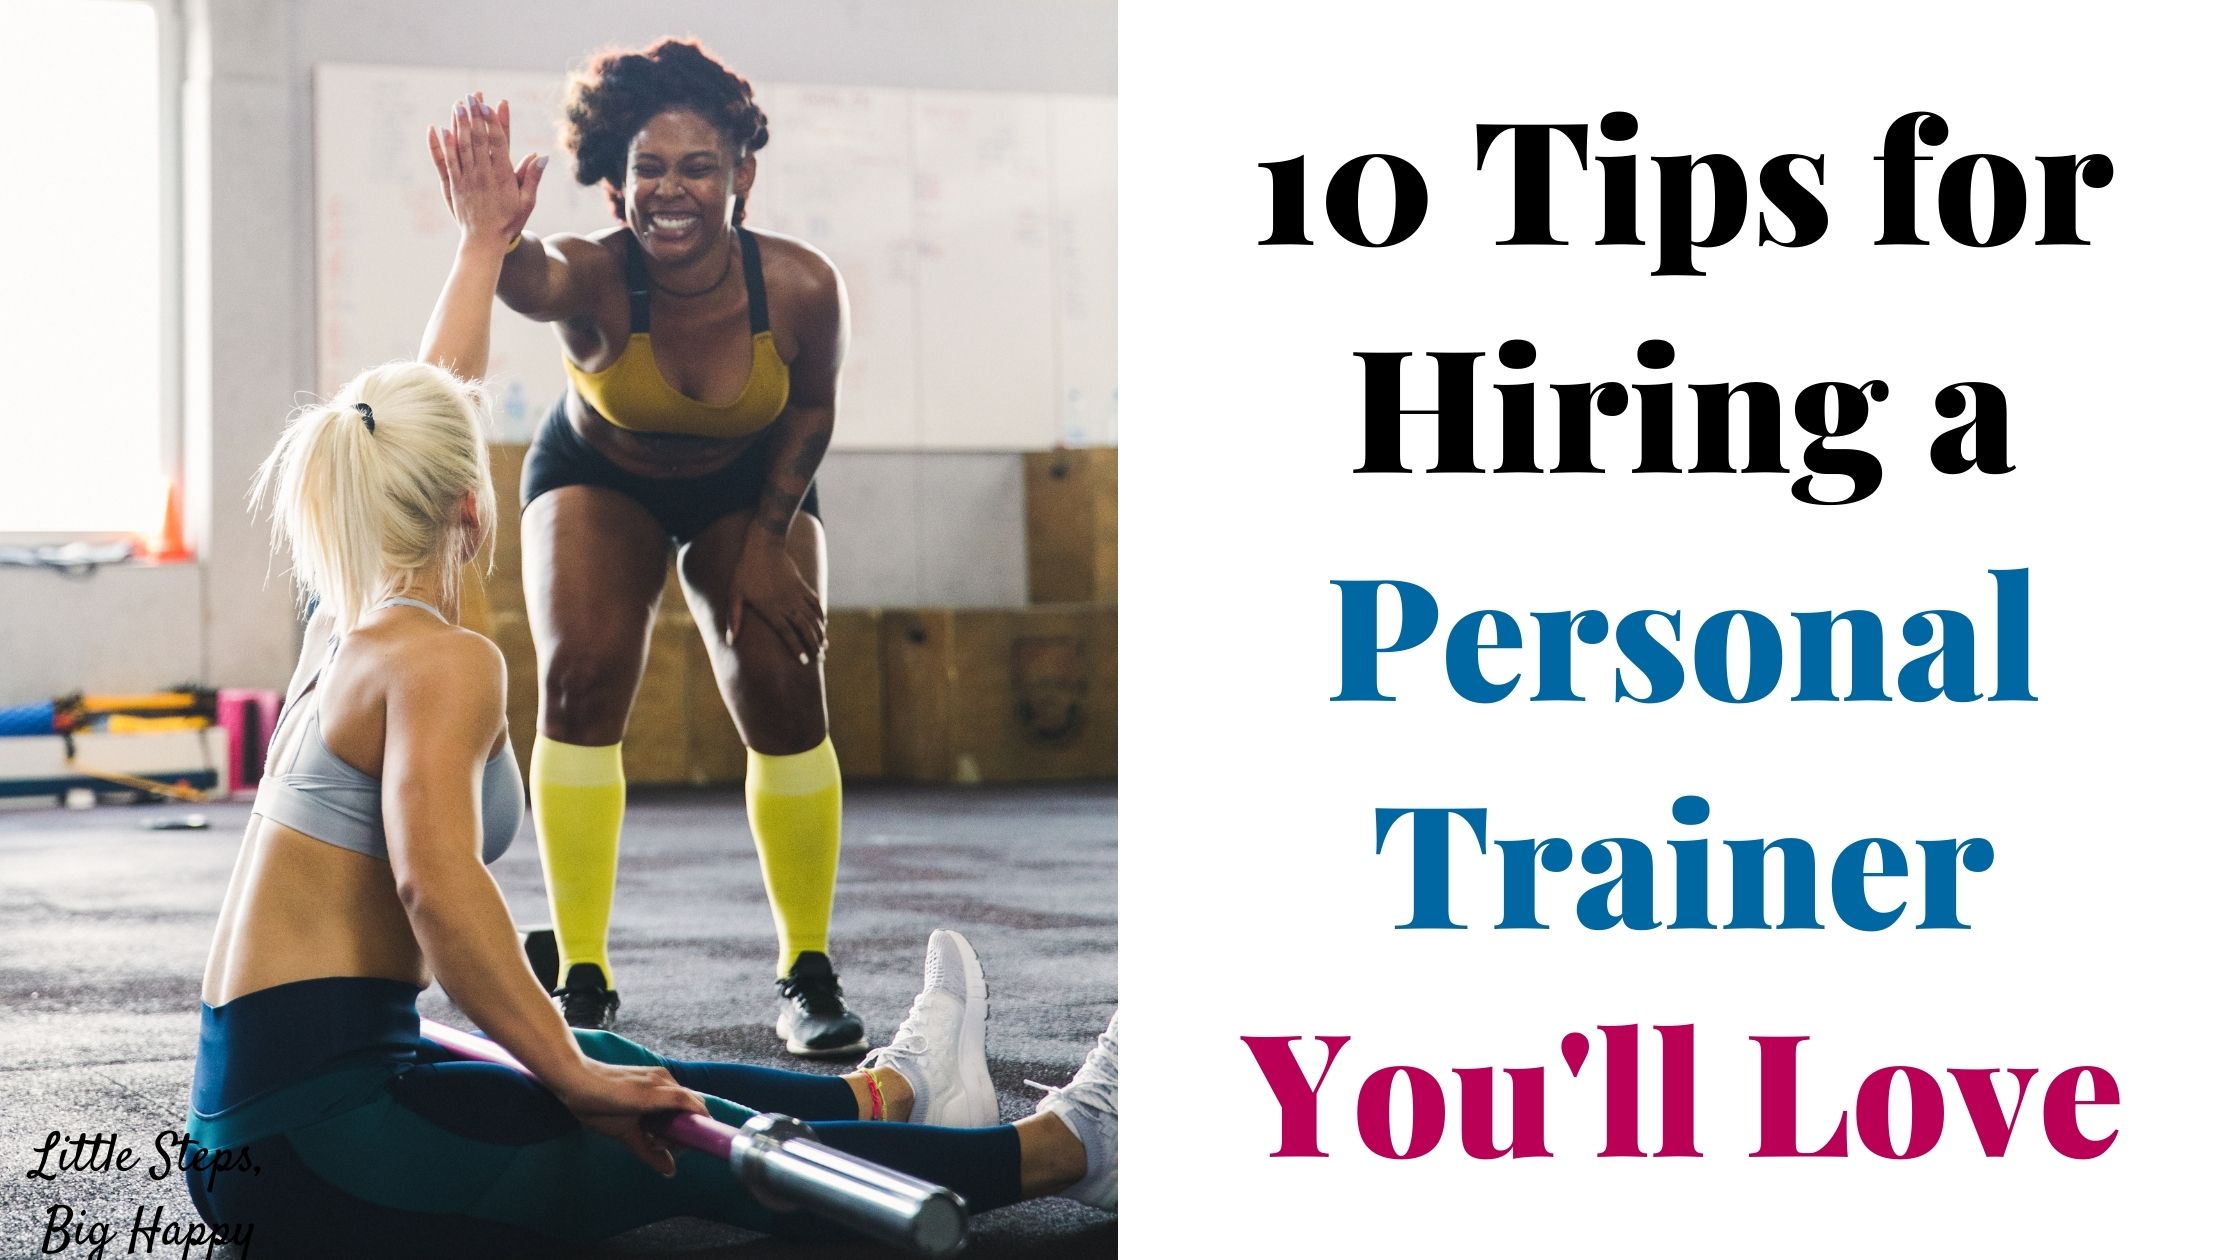 two women at a gym high fiving each other. Text says: 10 Tips for Hiring a Personal Trainer You'll Love